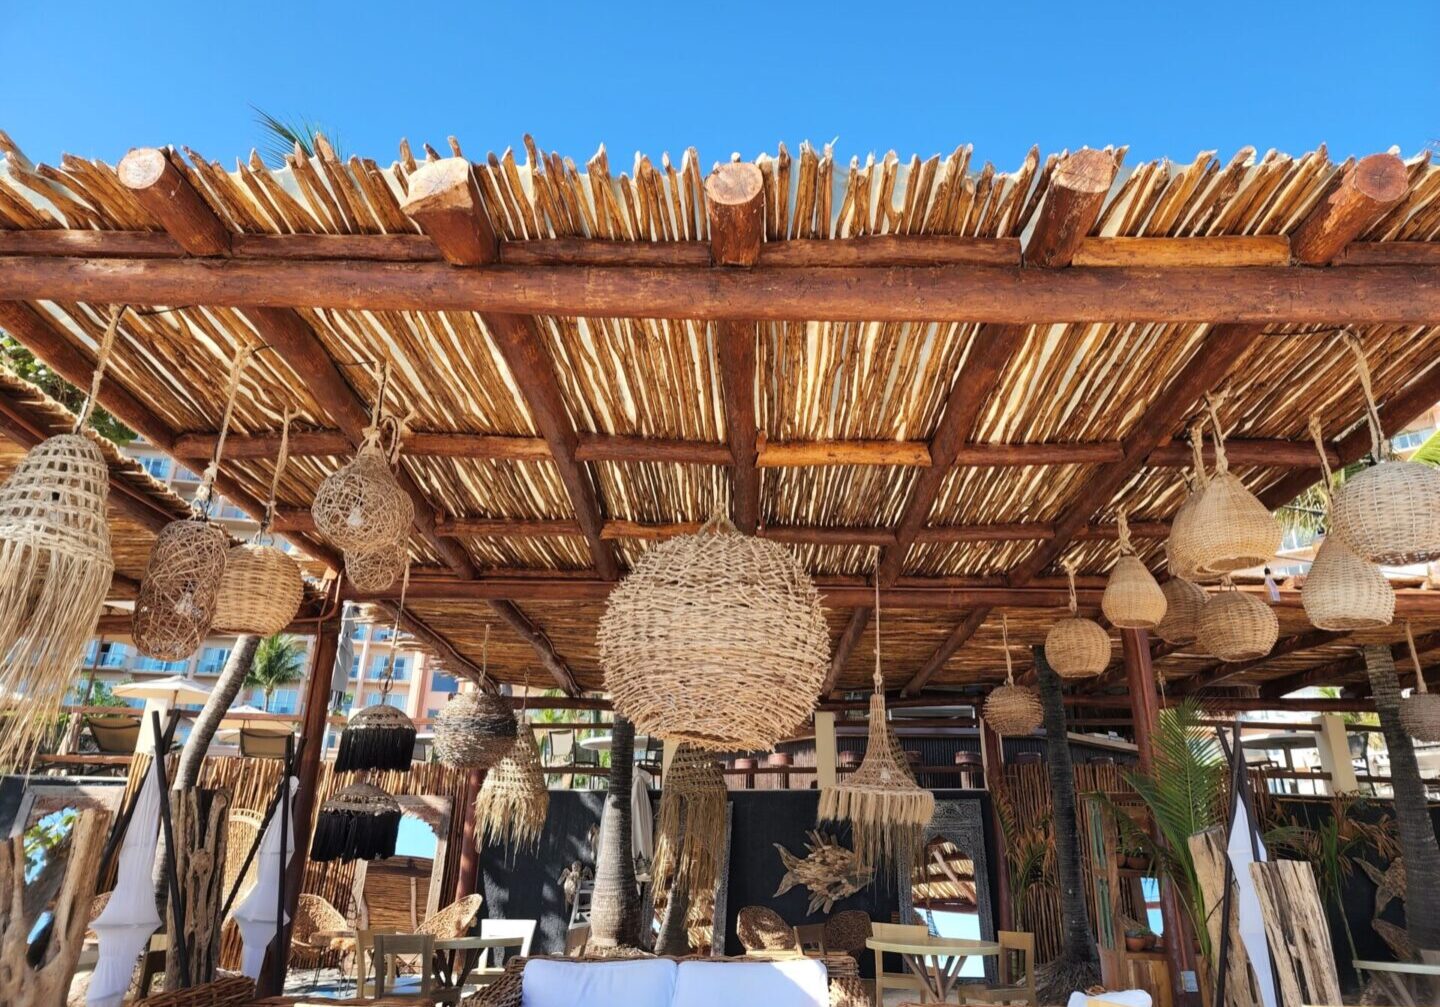 A restaurant with a wooden roof and hanging baskets.